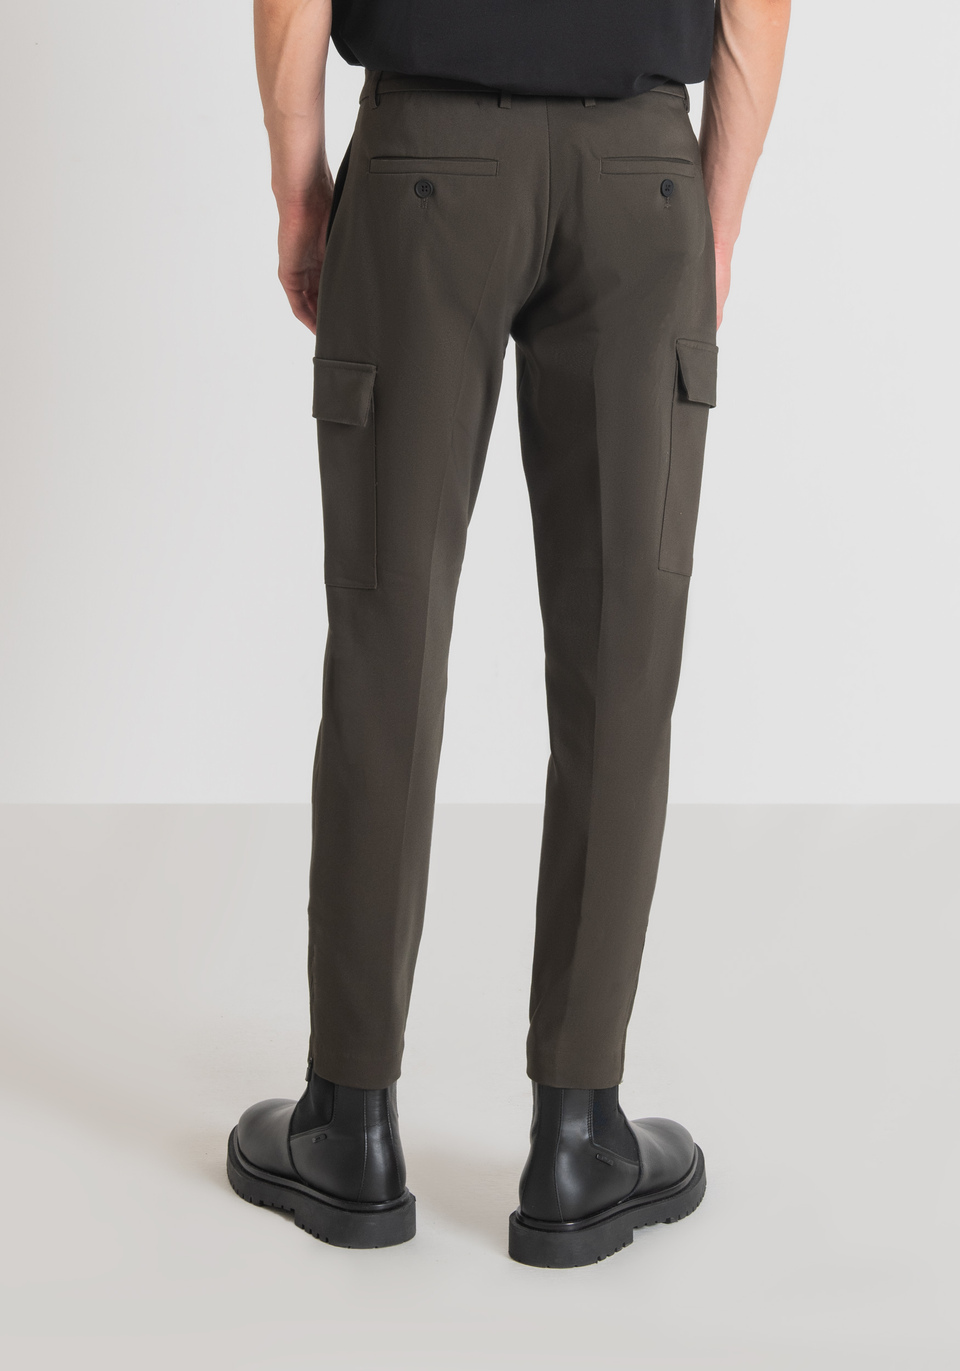 "BJORN" SKINNY FIT TROUSERS IN ELASTIC COTTON BLEND WITH SIDE POCKETS AND ZIP ON THE BOTTOM - Antony Morato Online Shop